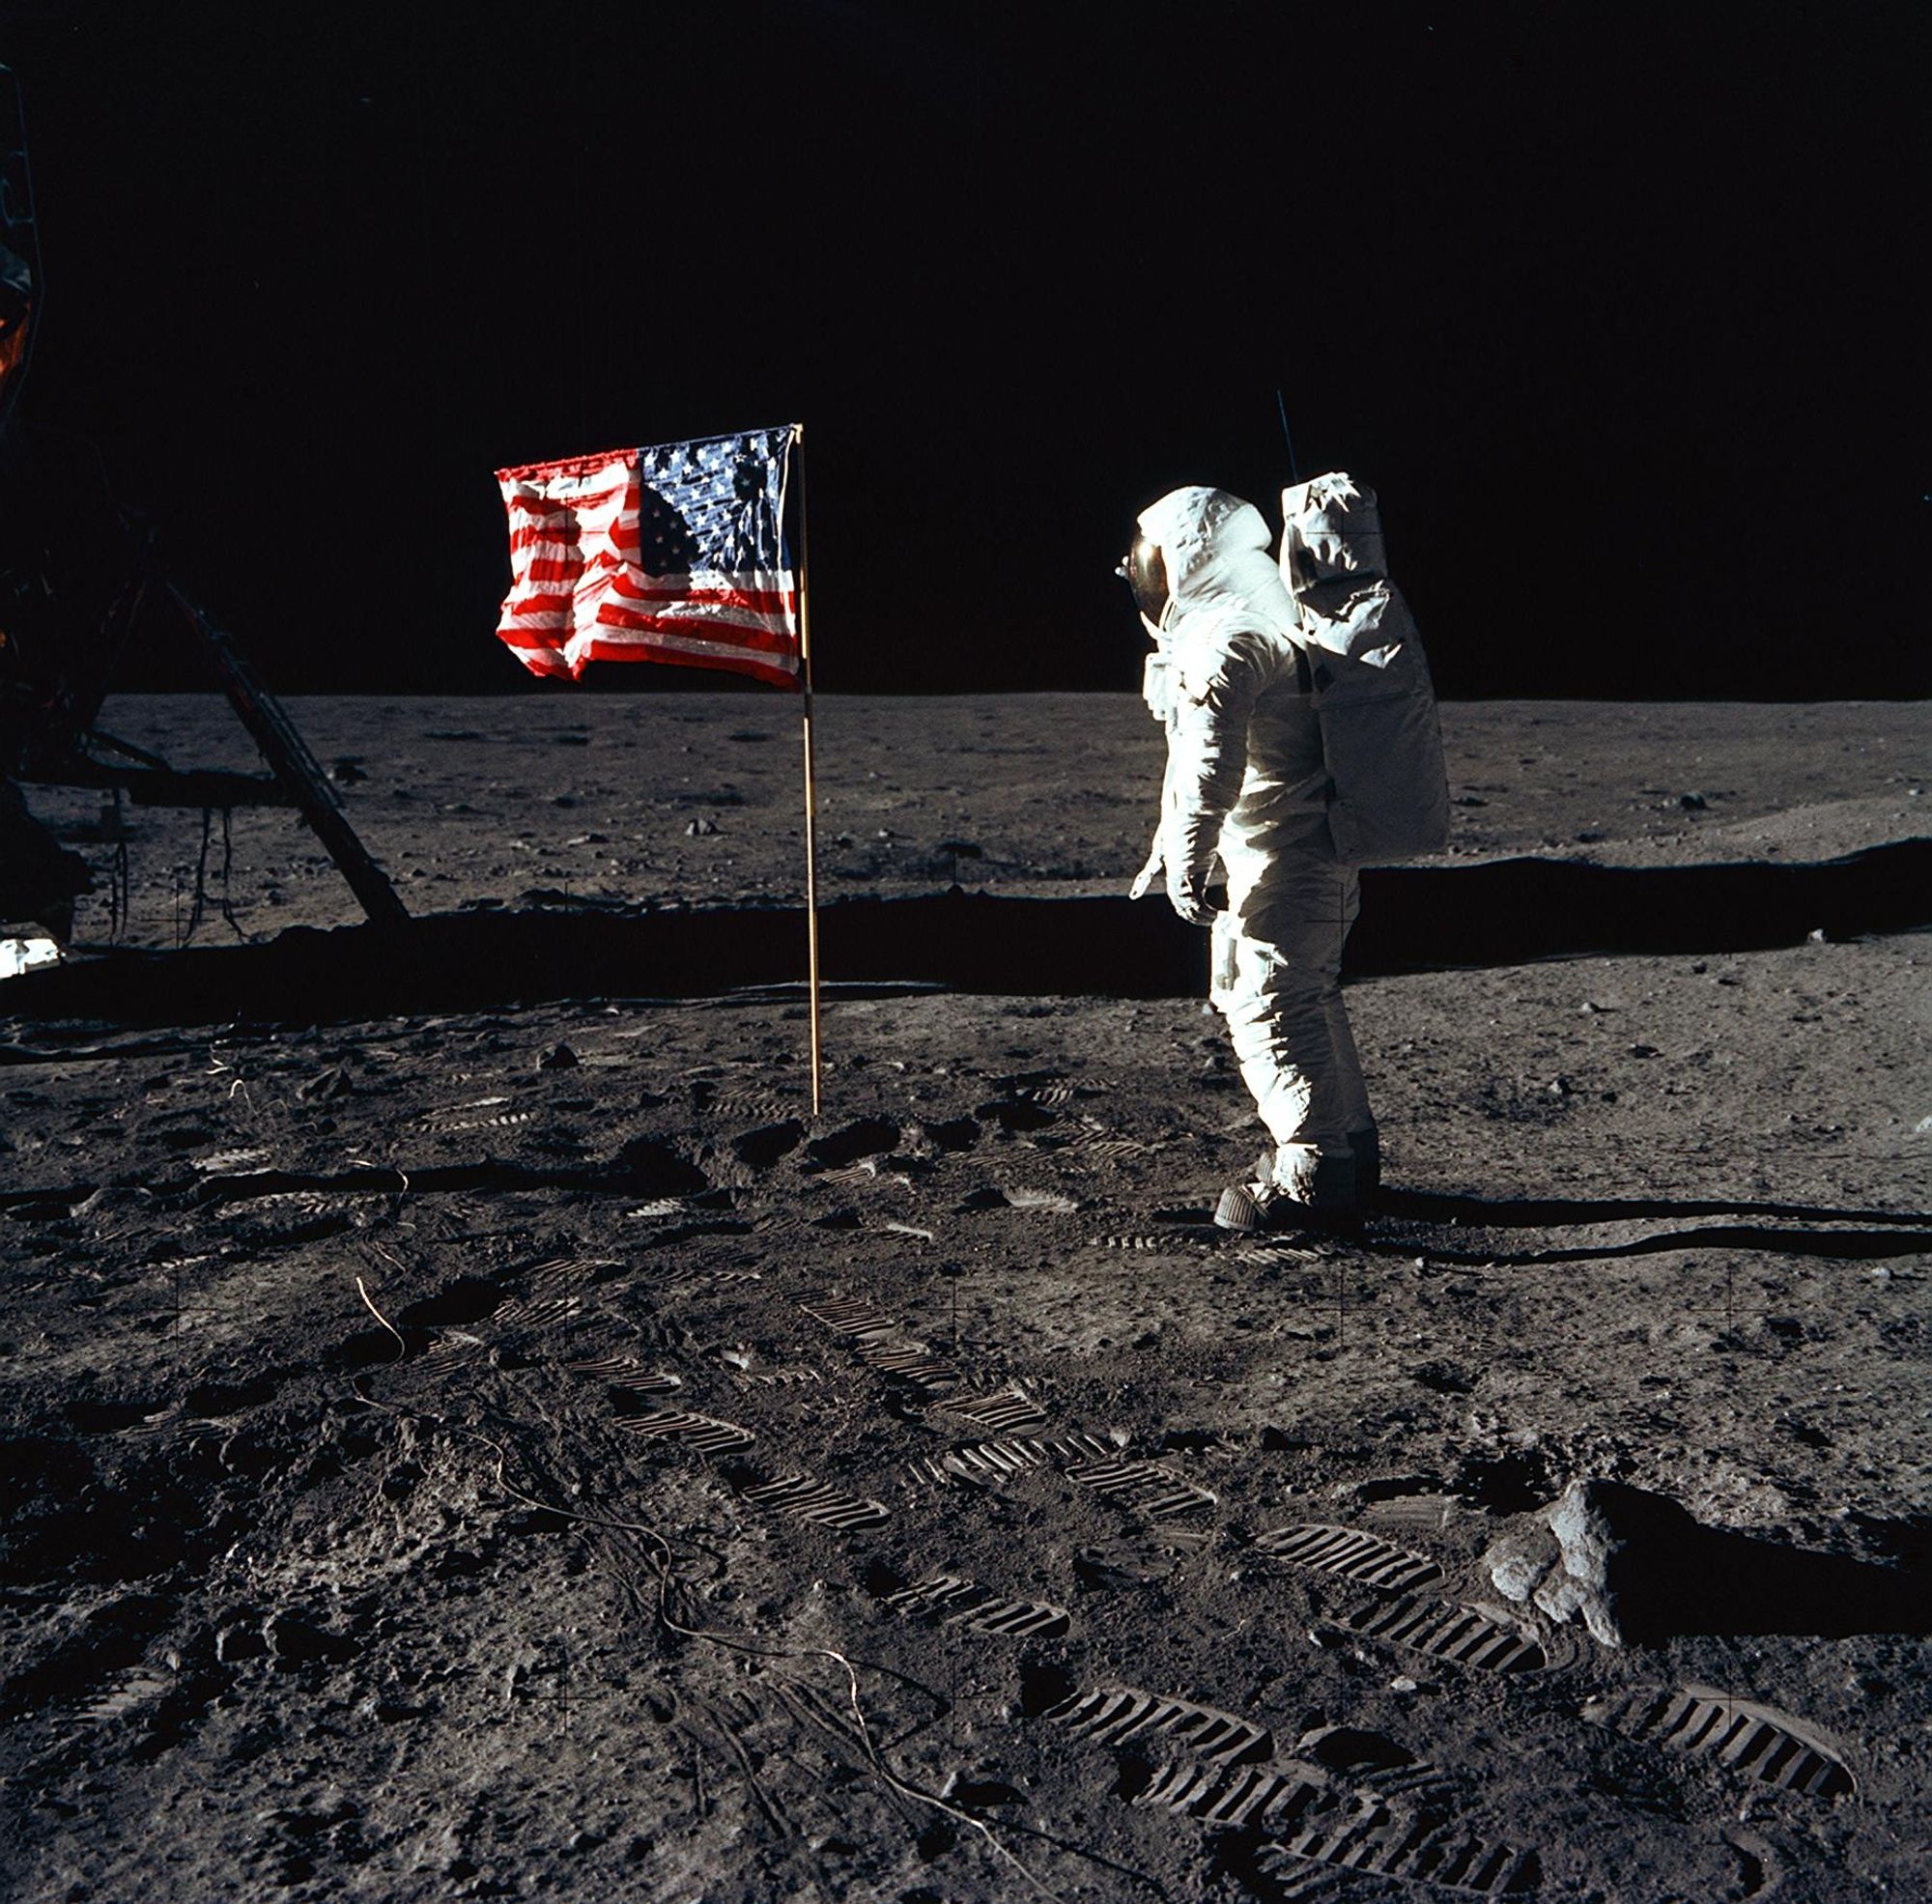 An astronaut on the moon posing with an American flag